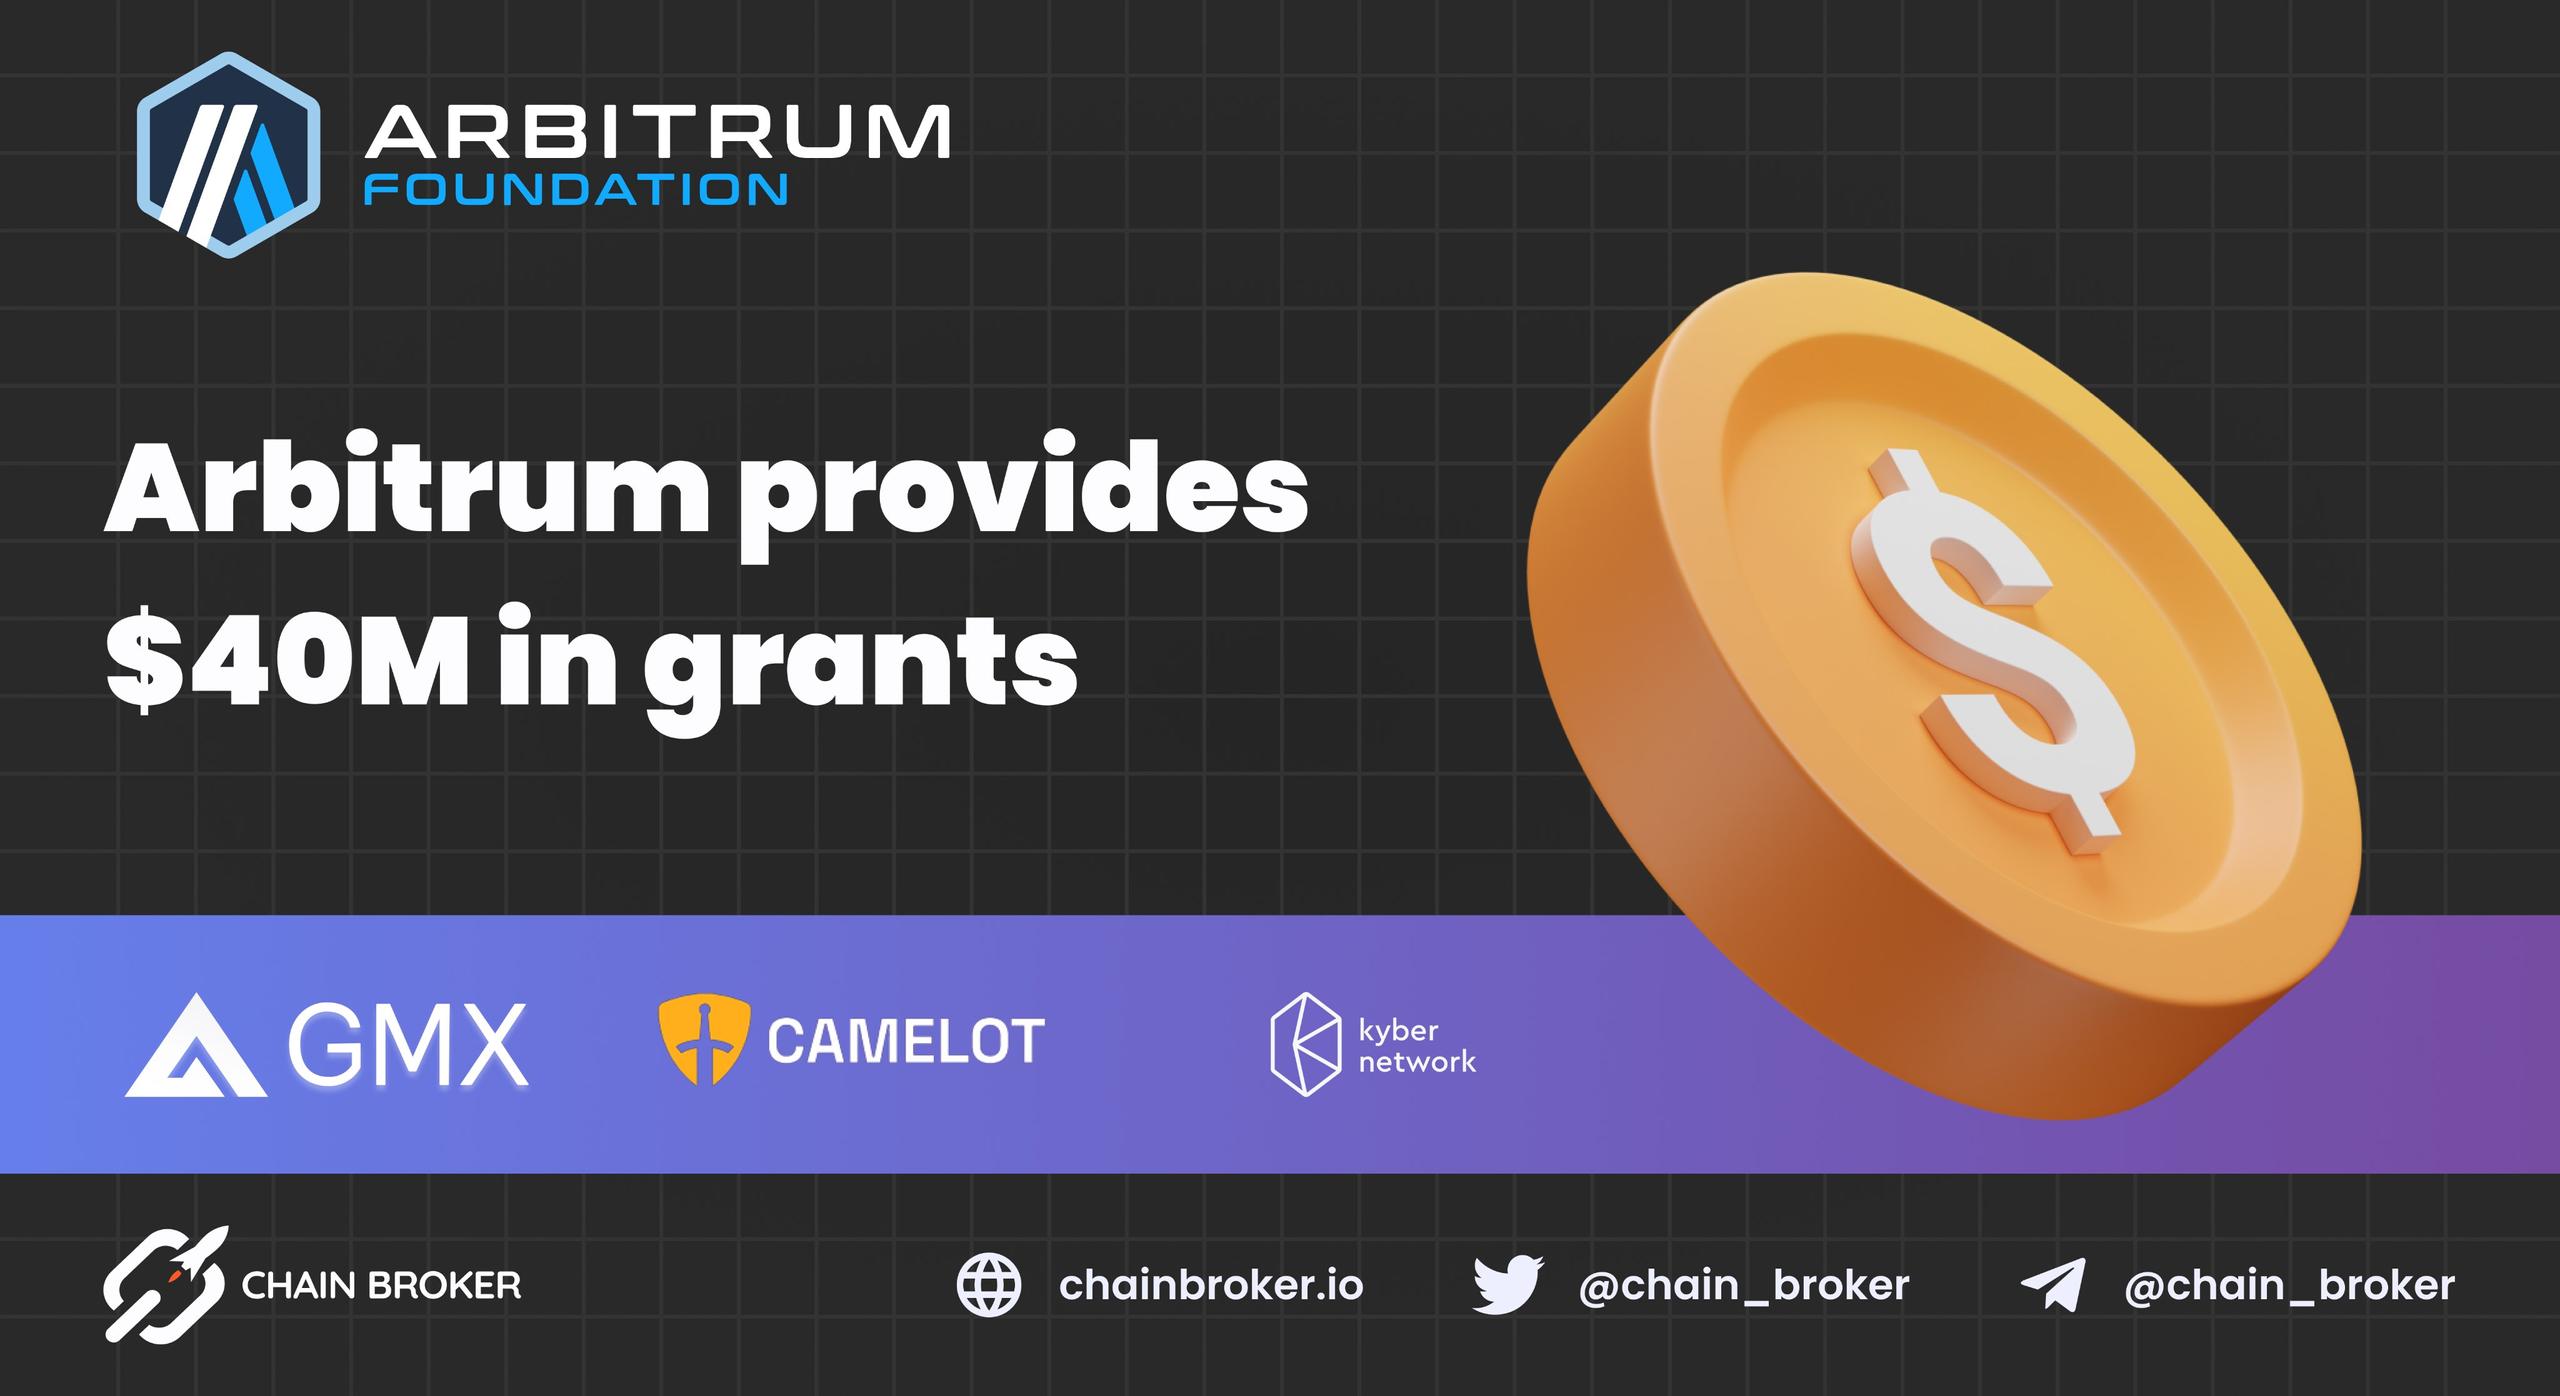 Arbitrum announced 29 projects to get grants for expanding products on chain